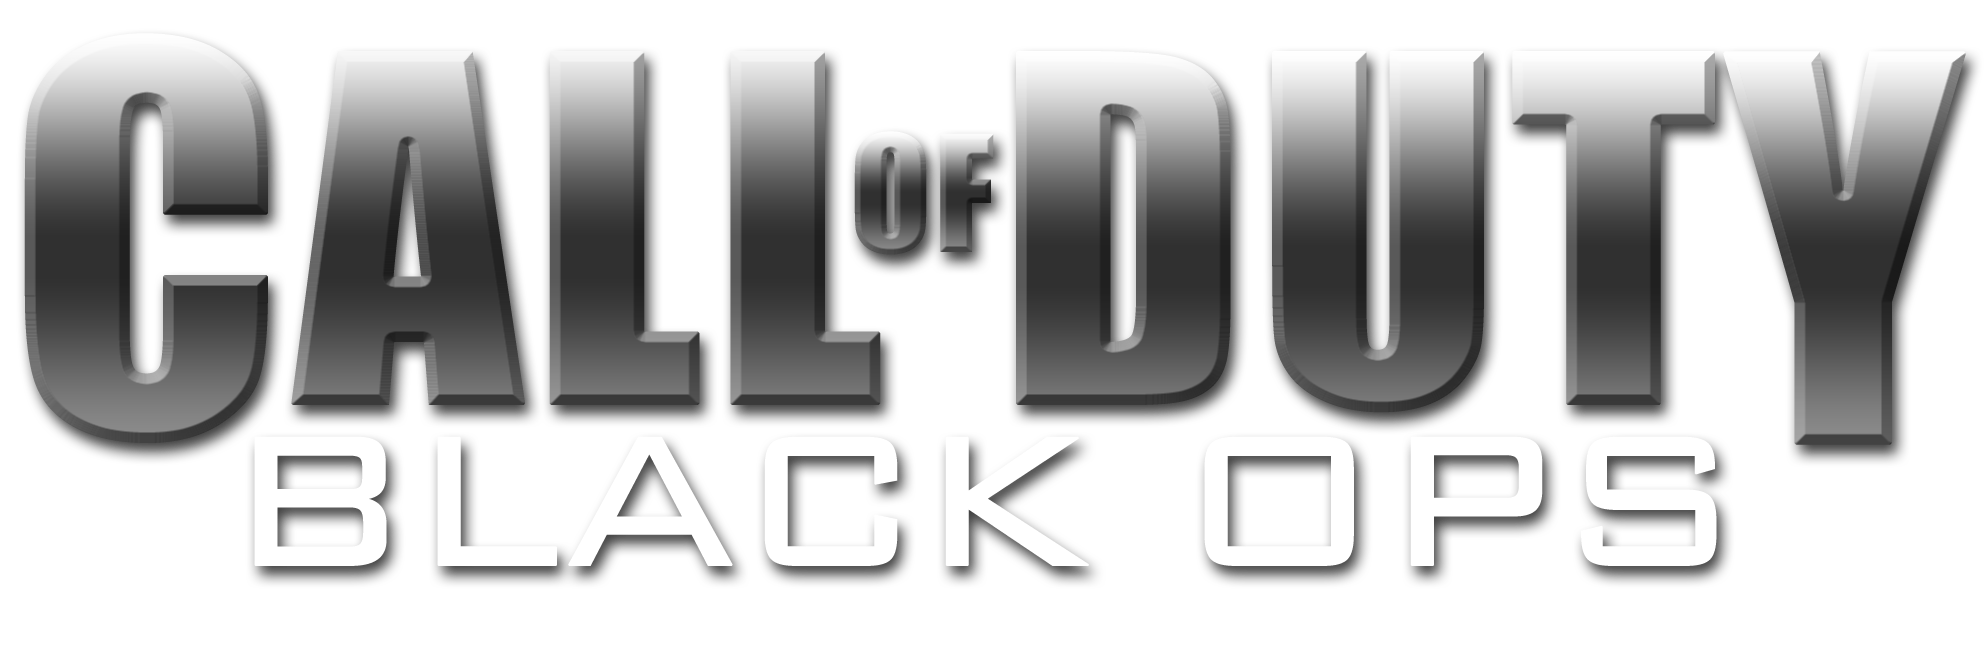 Call Of Duty Black Ops Png Transparent Image Png Mart